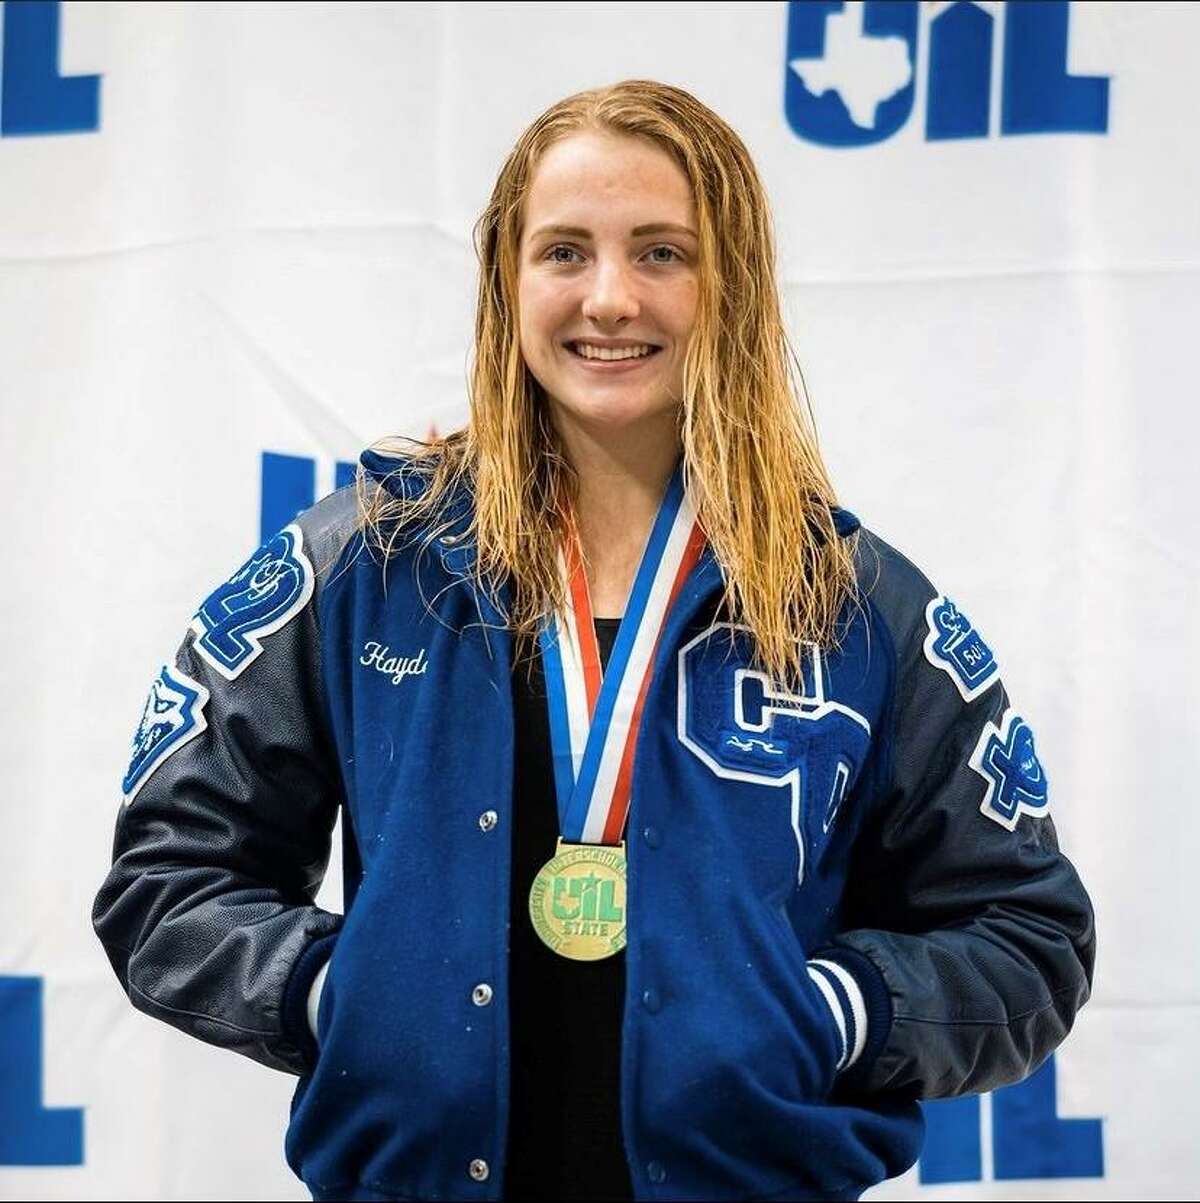 Cypress Creek senior Hayden Miller won two gold medals at the UIL State Swimming and Diving Championships at Lee & Joe Jamail Texas Swimming Center, Saturday, Feb. 19, 2022, in Austin.